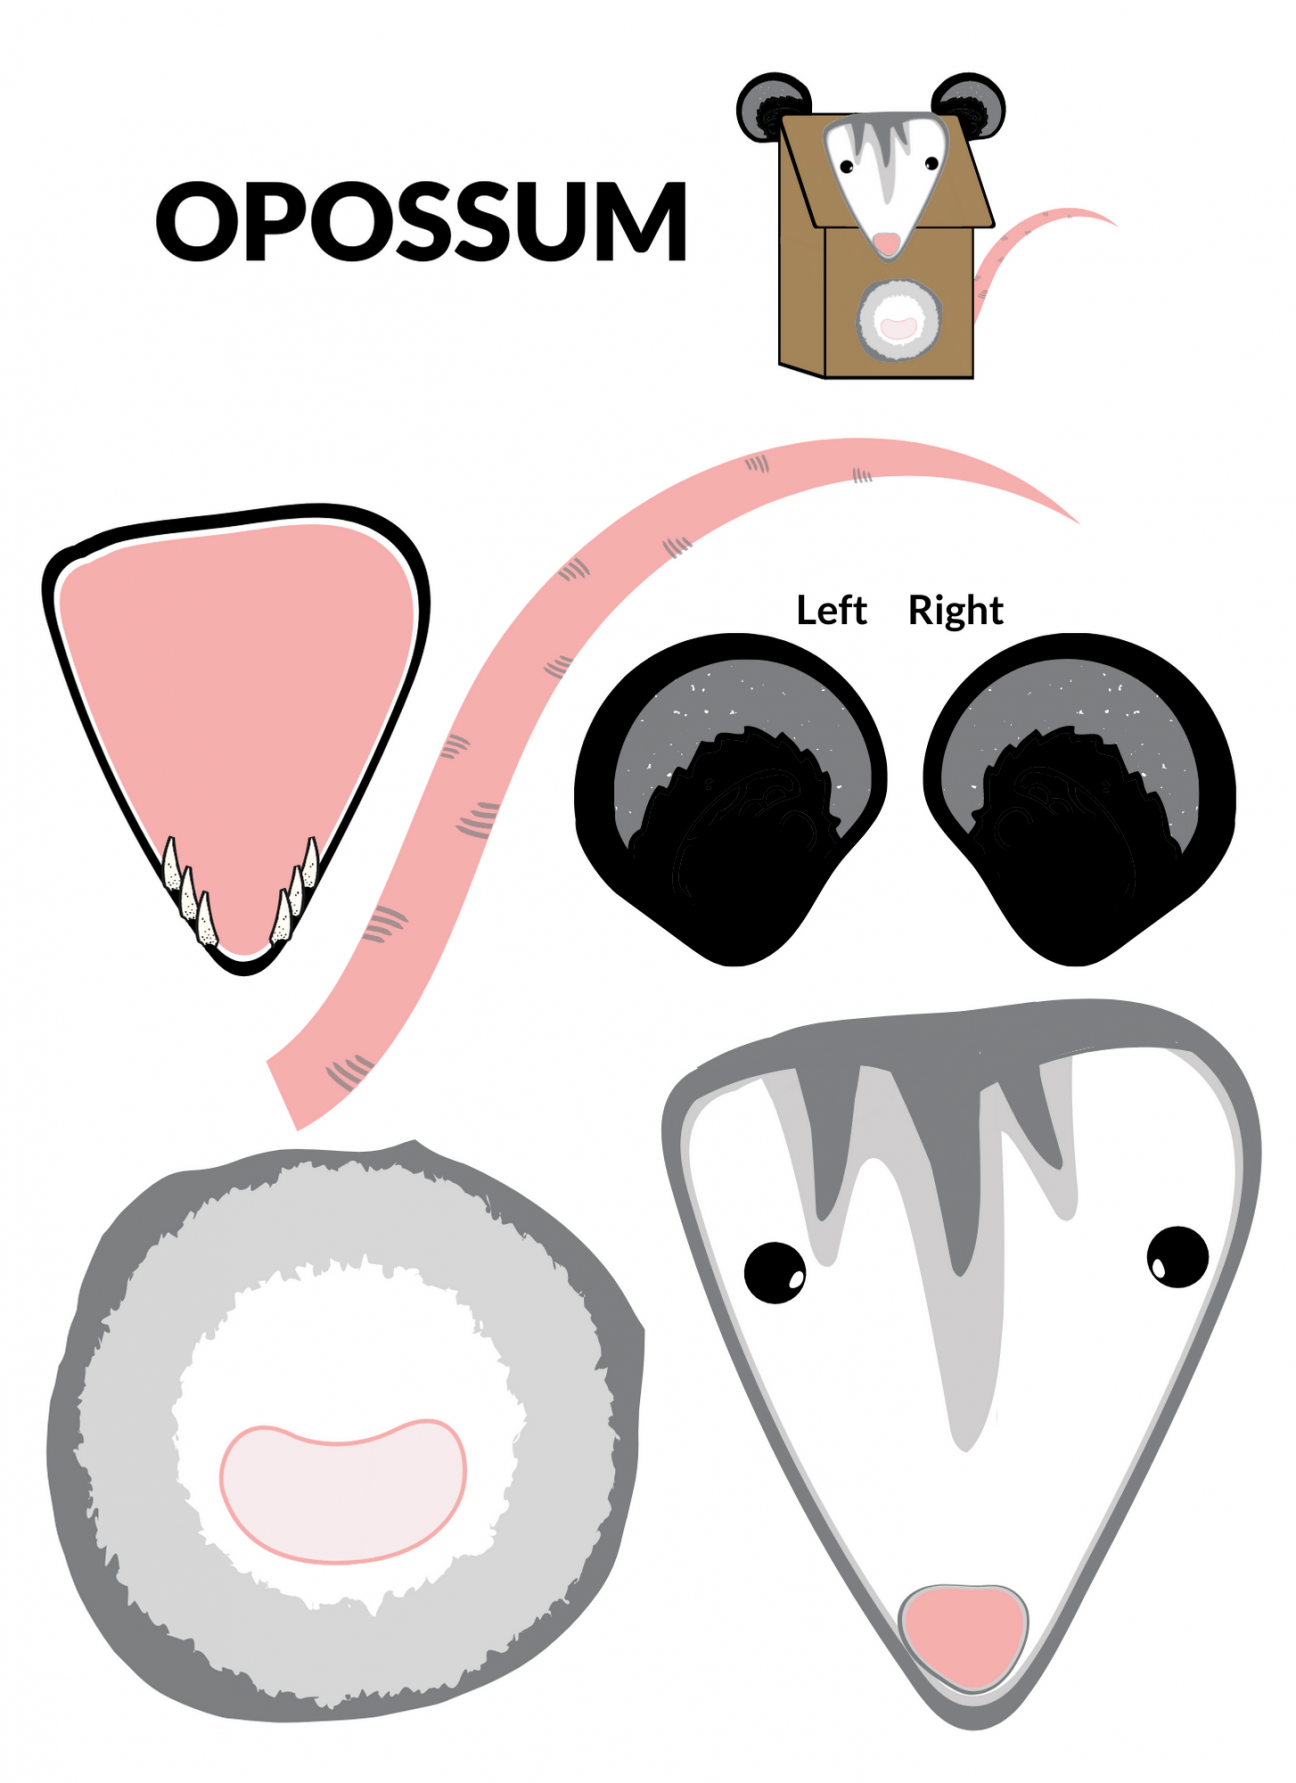 Opossum puppet template: a mouth, tummy, tail, two ears, and face shape